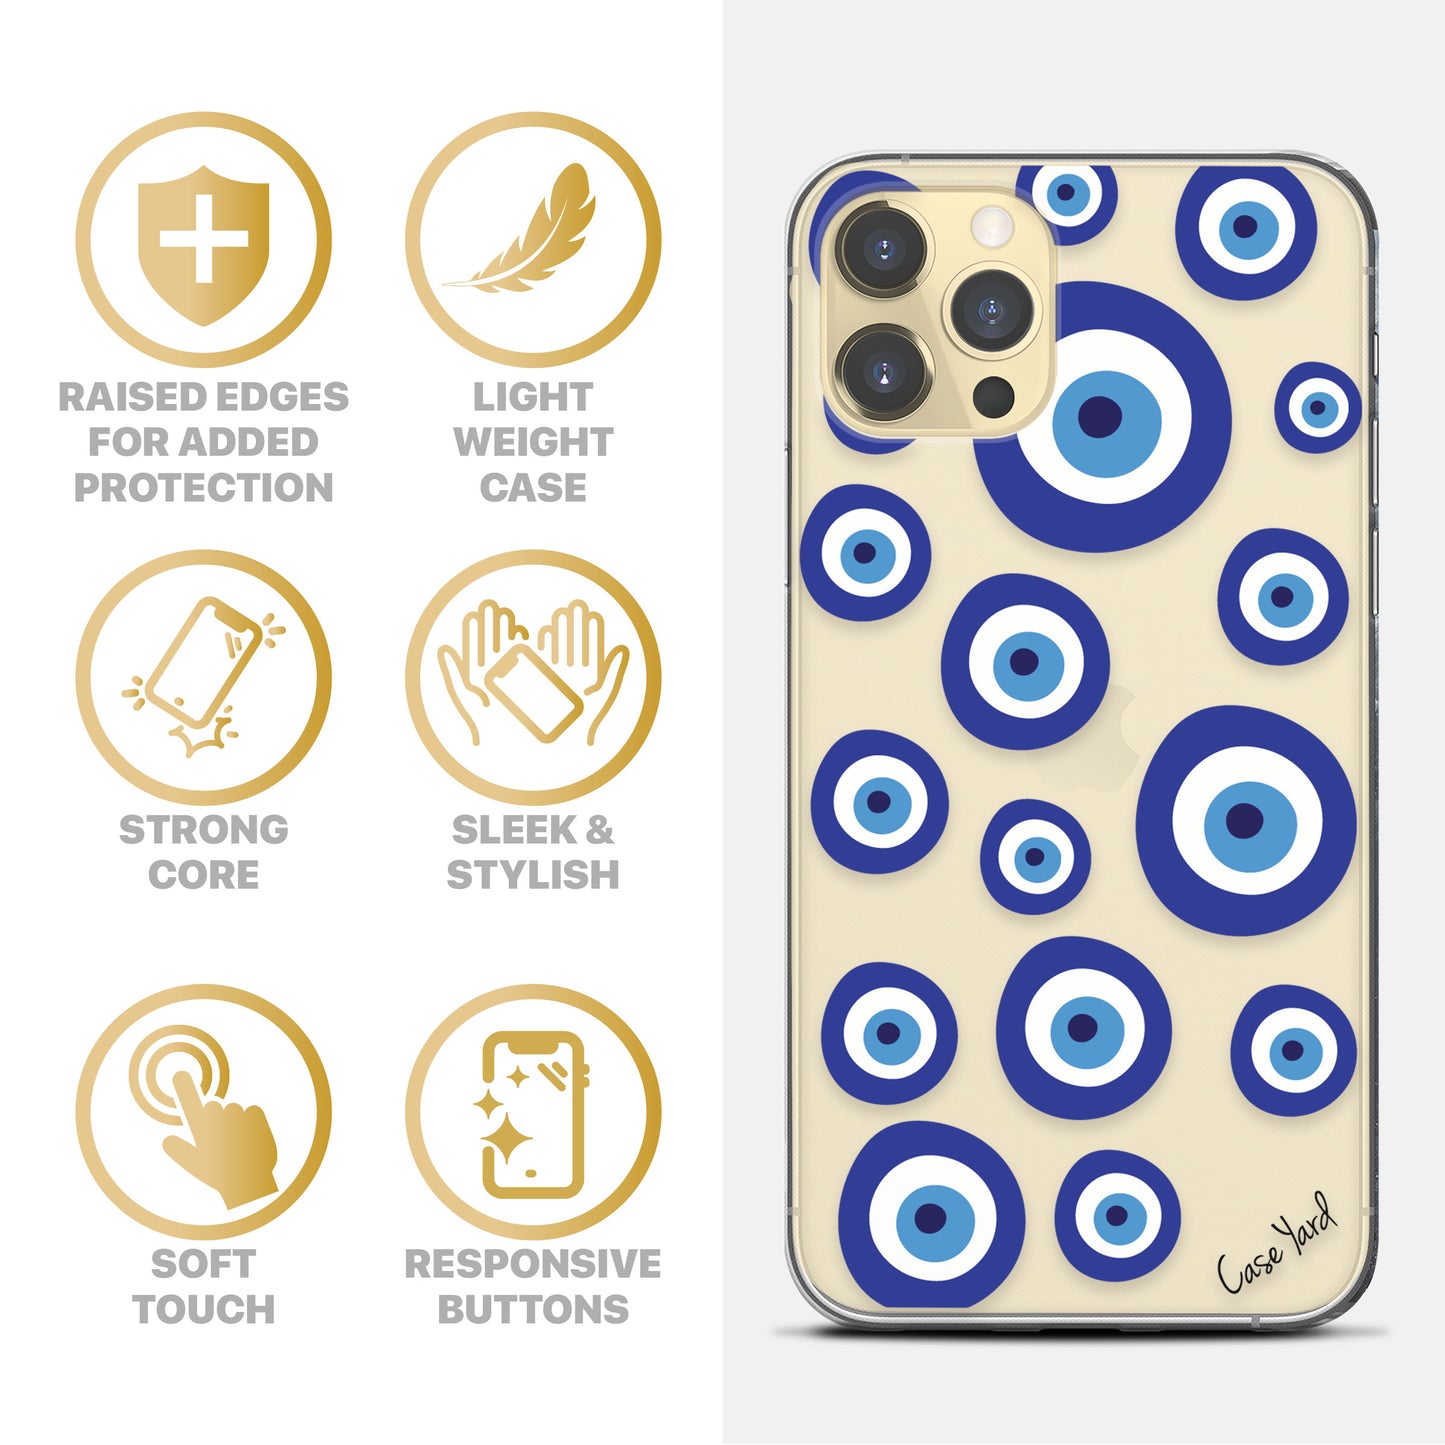 TPU Clear case with (Evil Eye Pattern) Design for iPhone & Samsung Phones